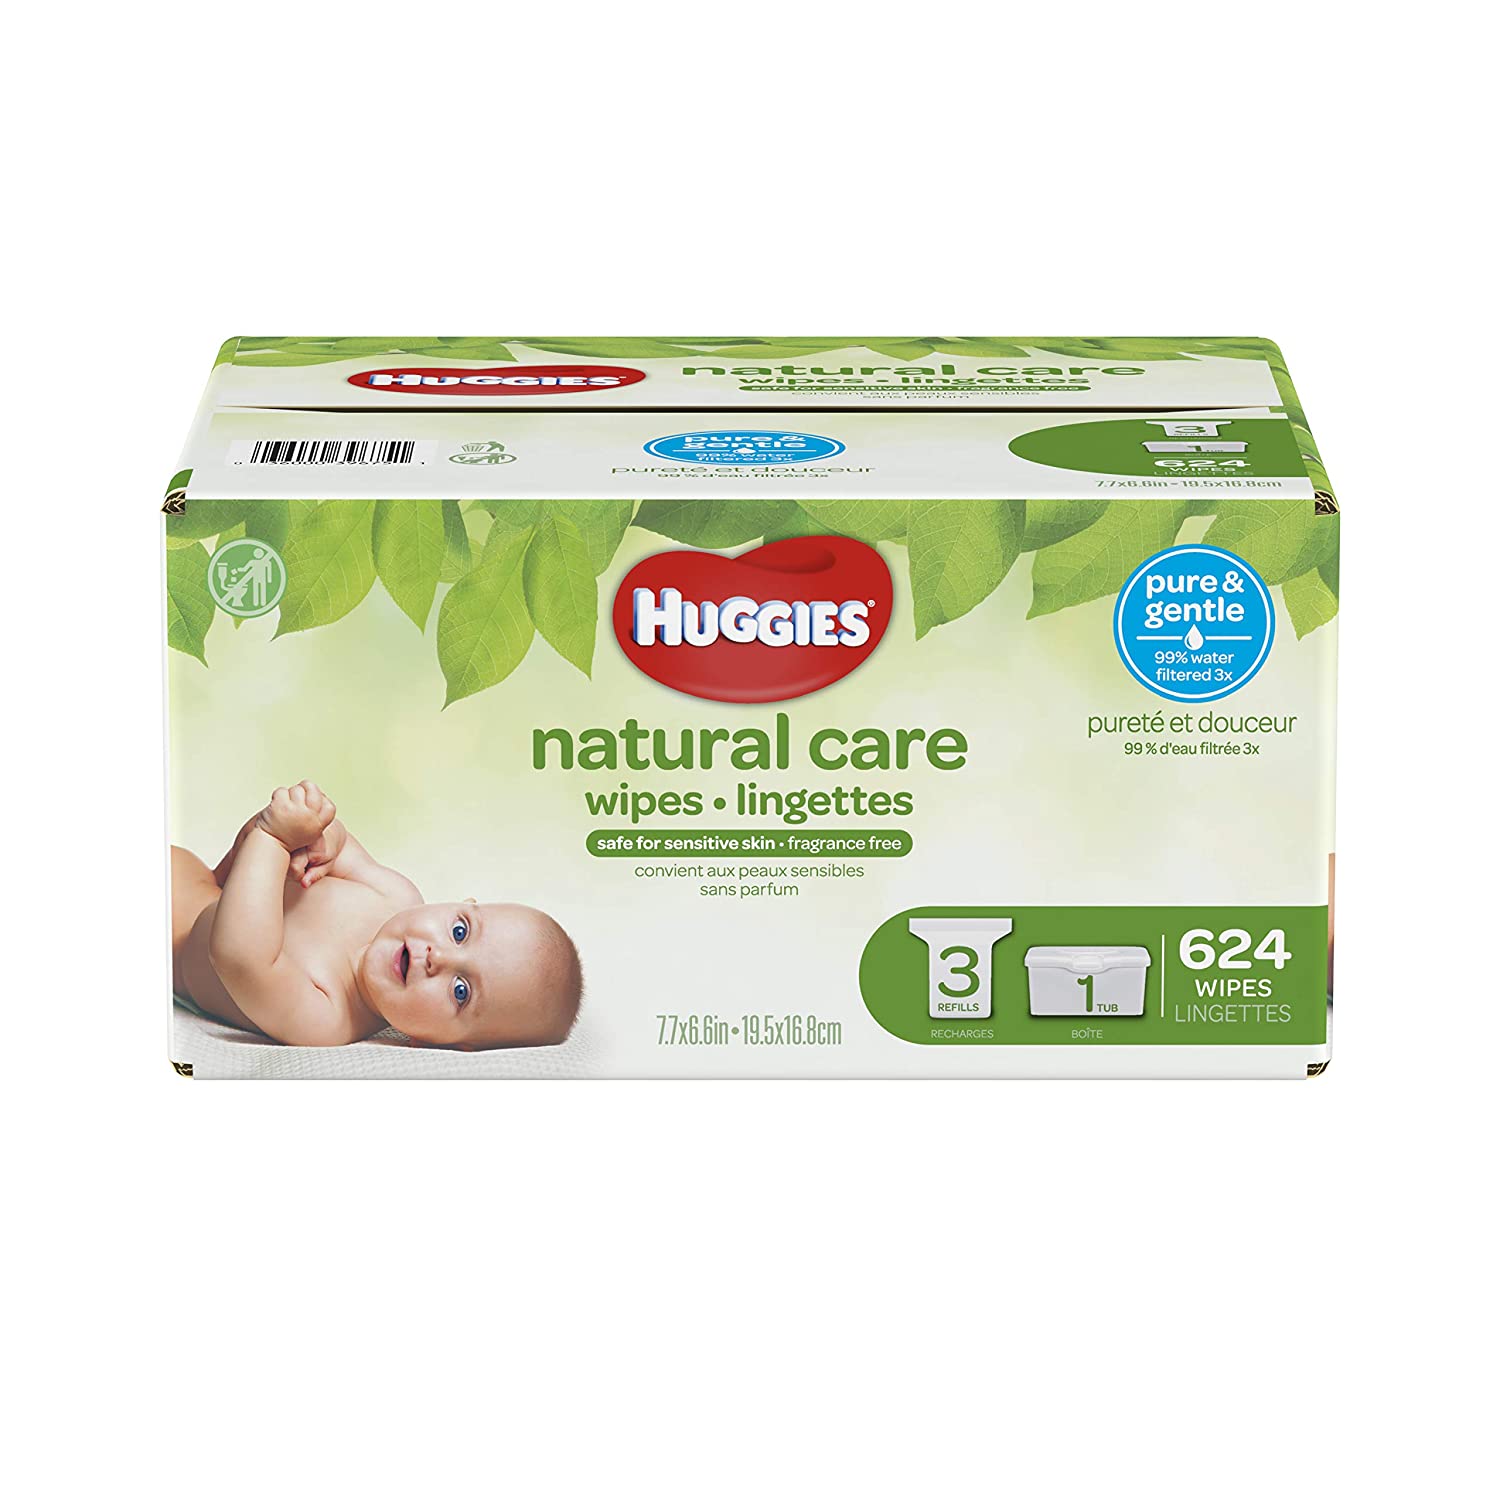 Top 7 Best Natural Baby Wipes Reviews in 2022 3